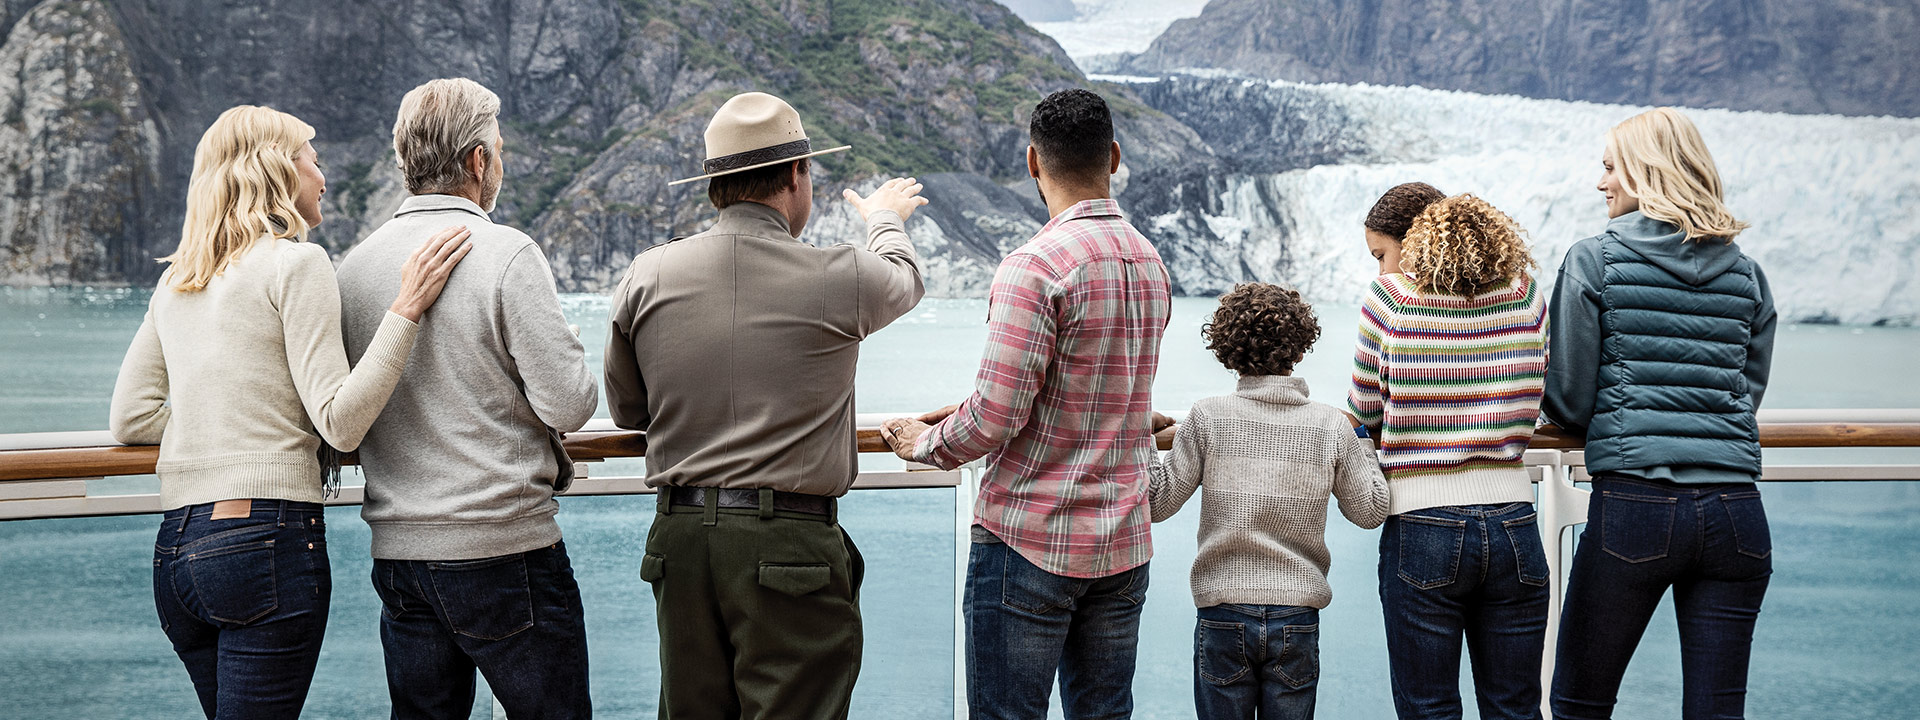 Find Everything Your Family Could Hope For on A Princess Cruise